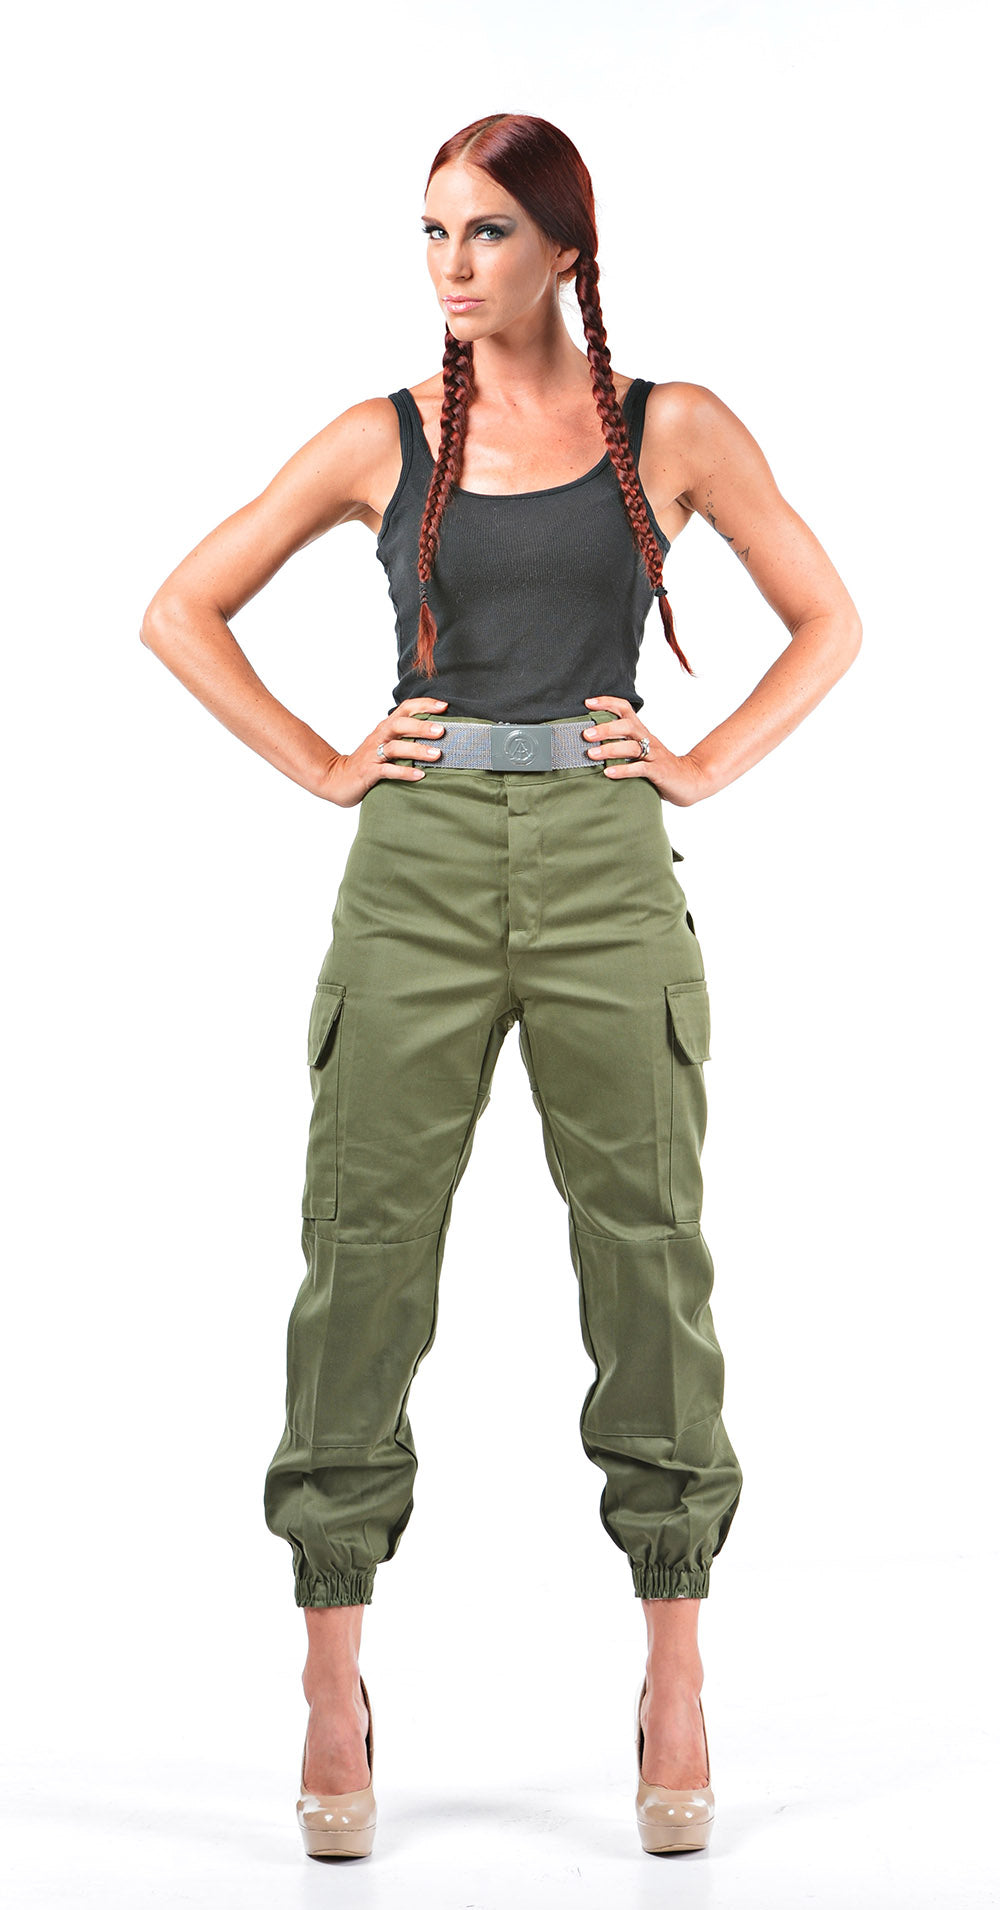 Olive Green Women's Pants for sale in San Francisco, California